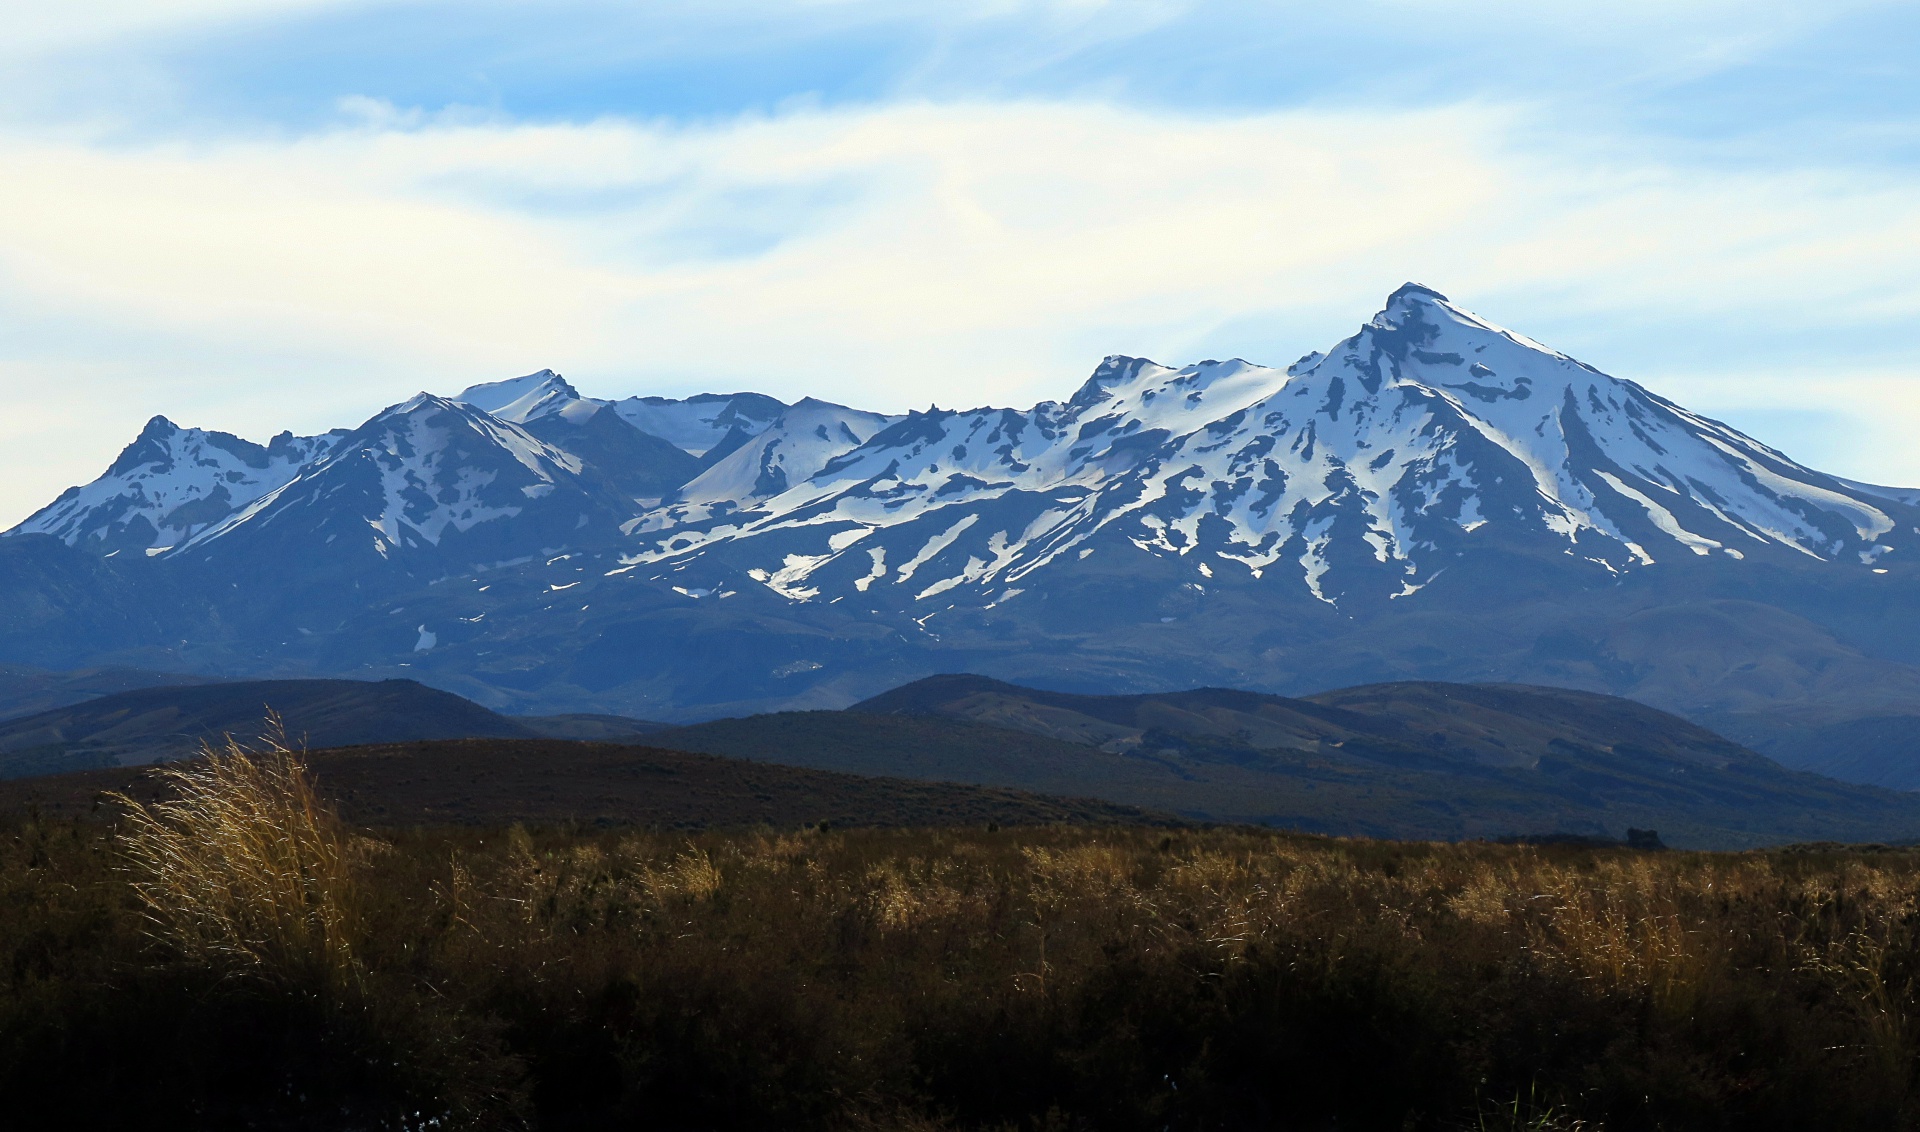 Next to, but not to be confused with, Mt. Doom. This is Mount Ruapehu